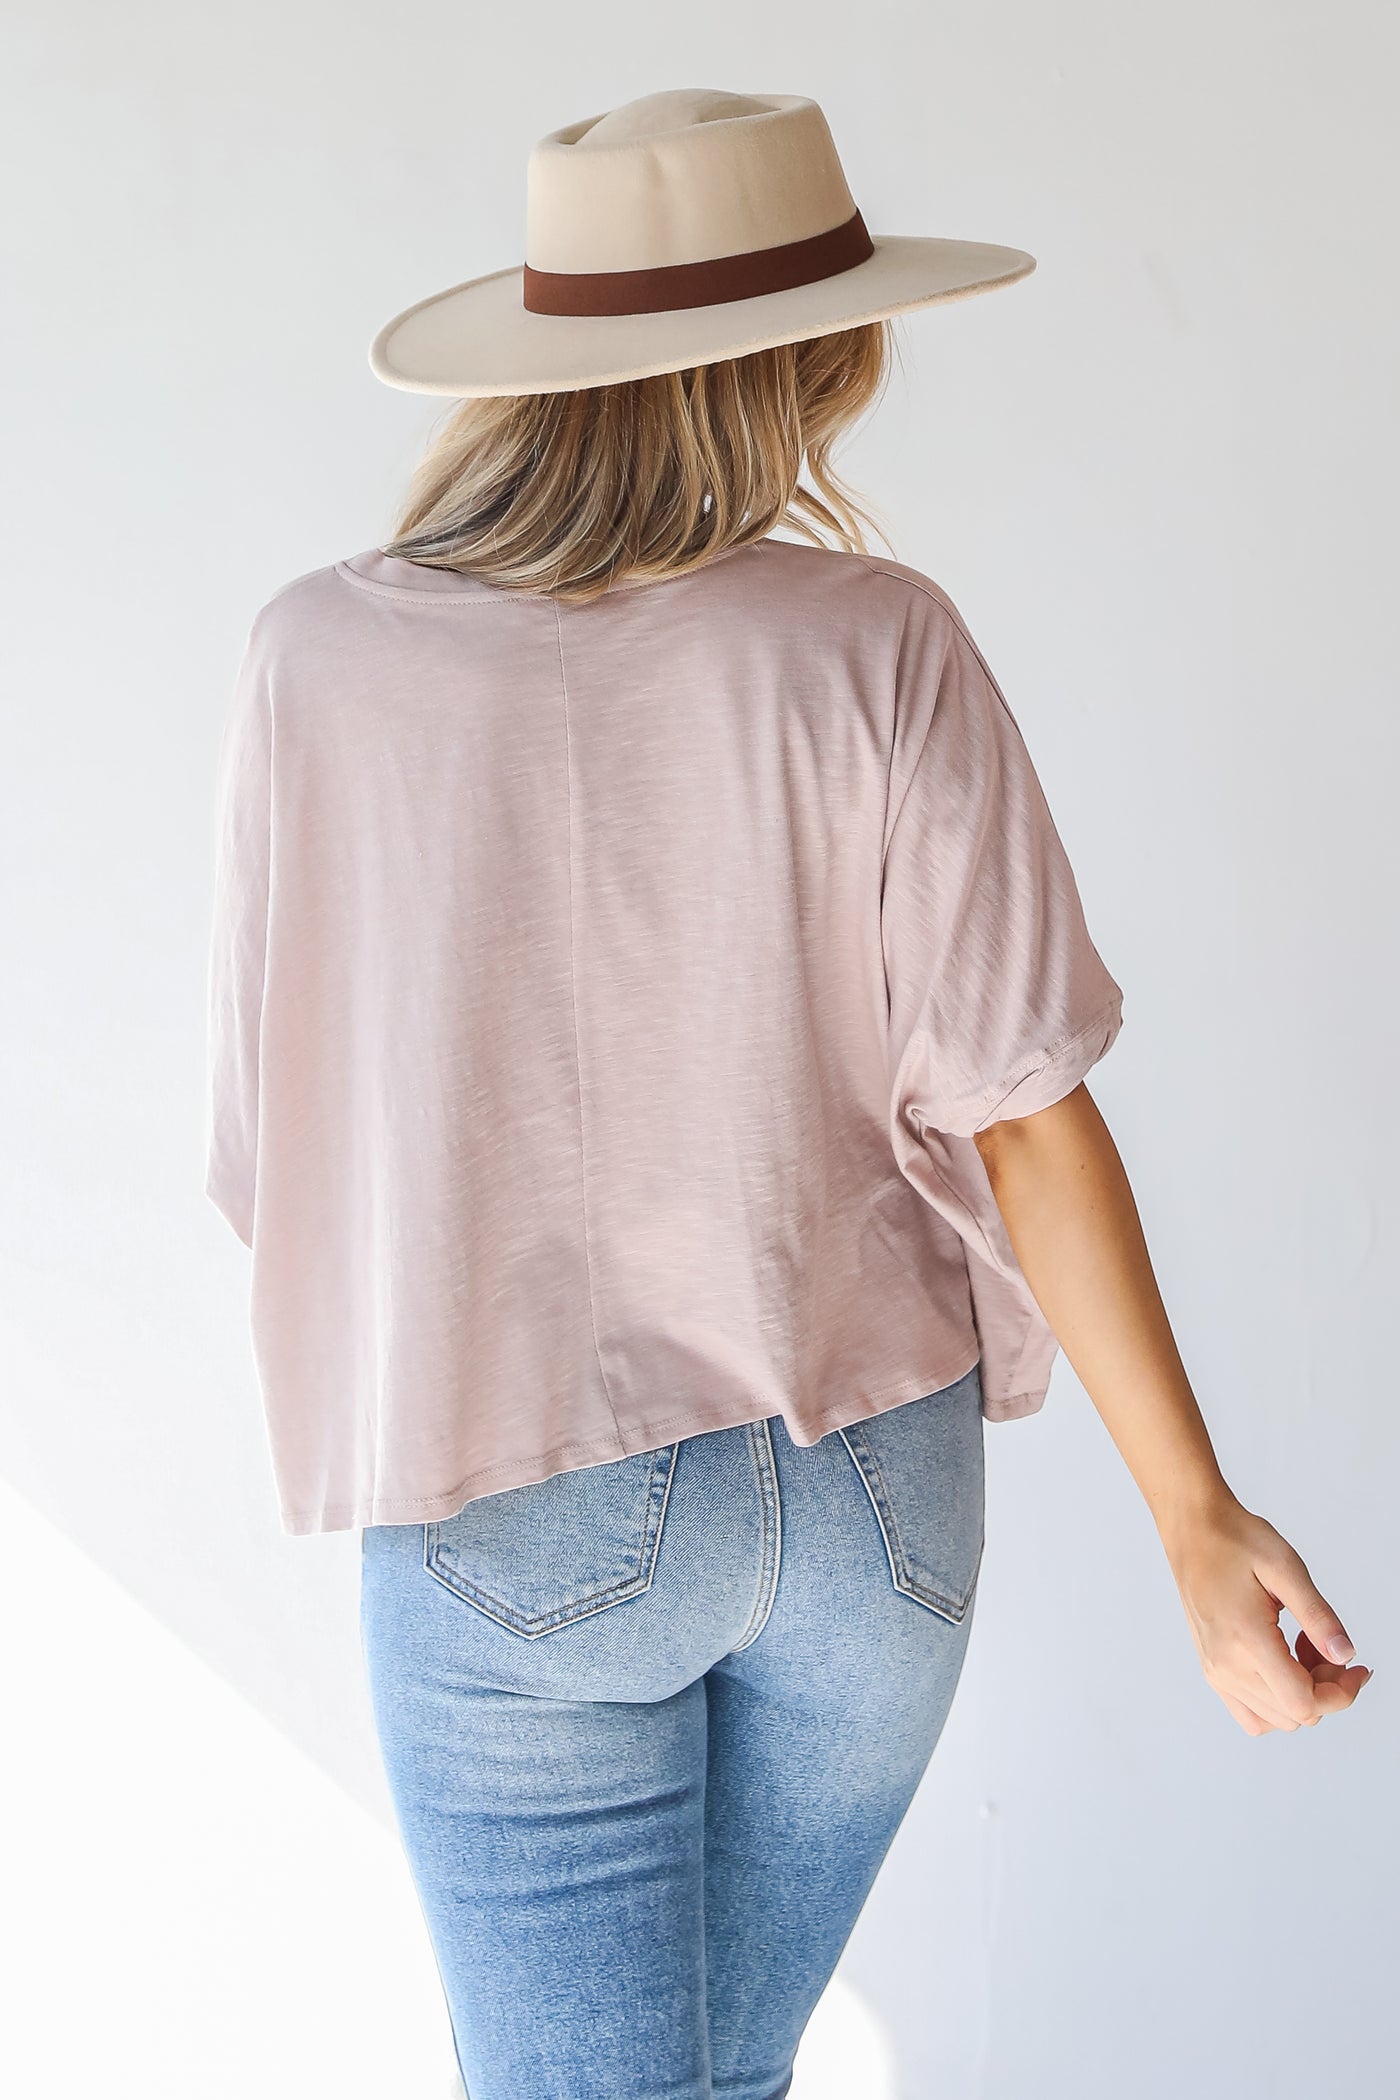 Oversized Top in taupe back view